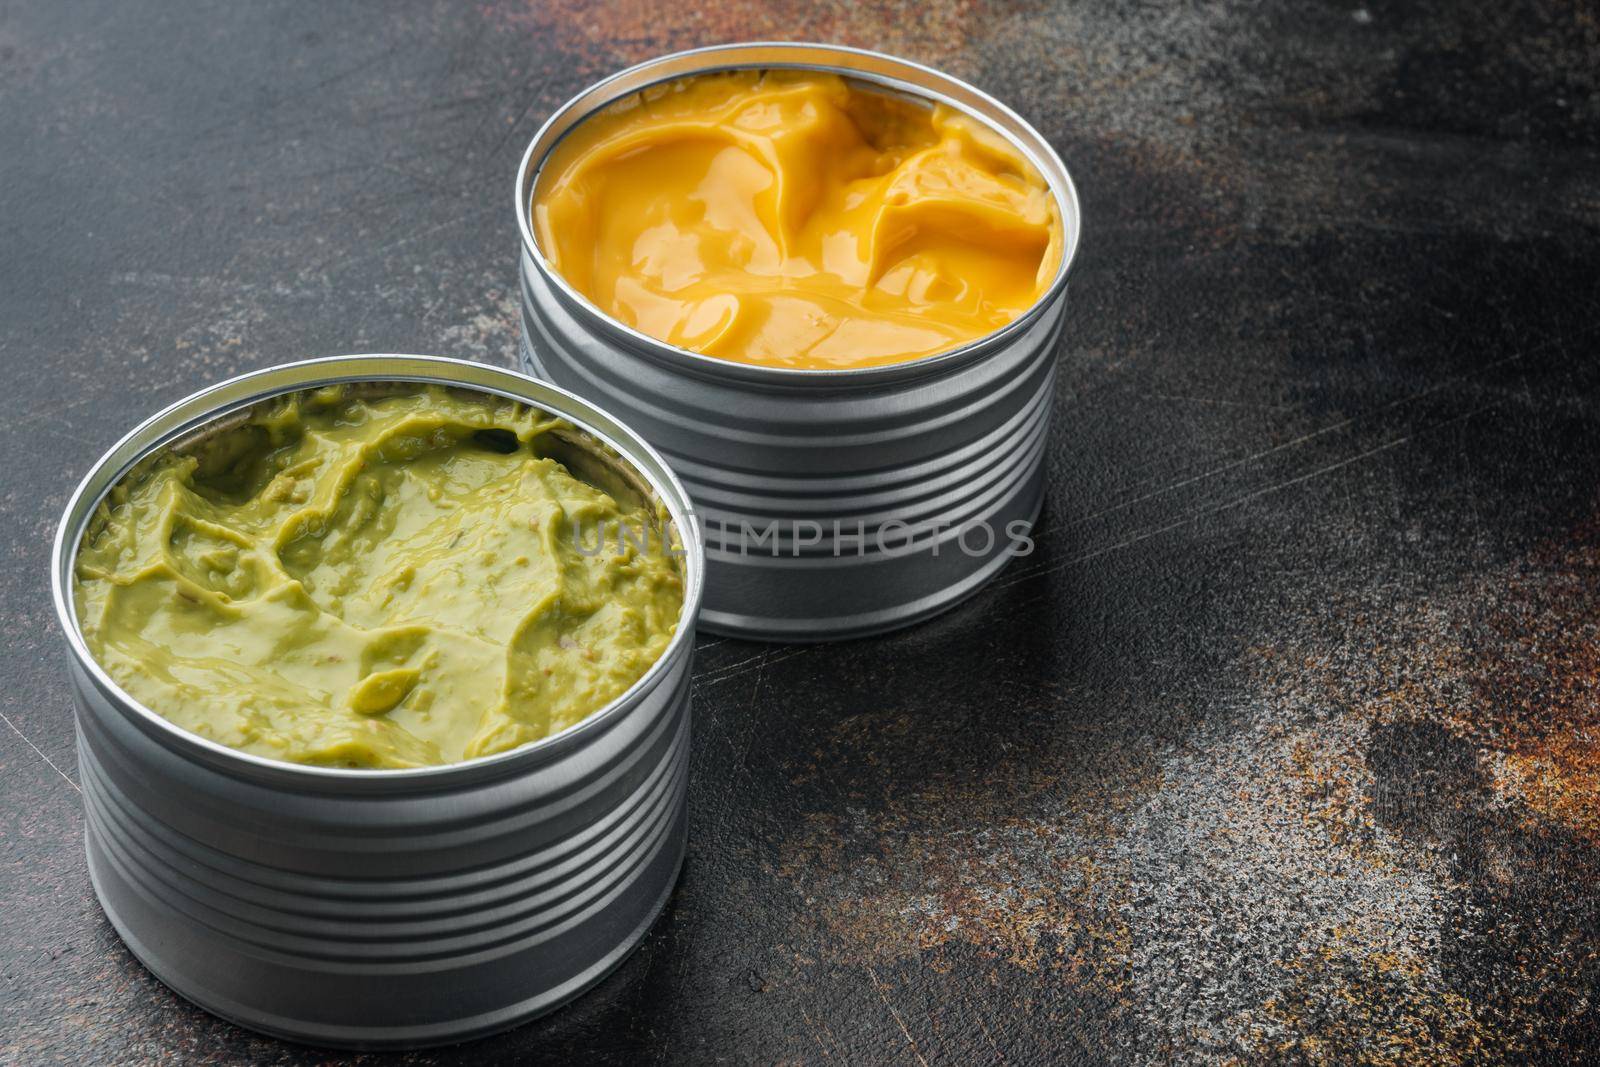 Canned cheese and guacamole sauce by Ilianesolenyi